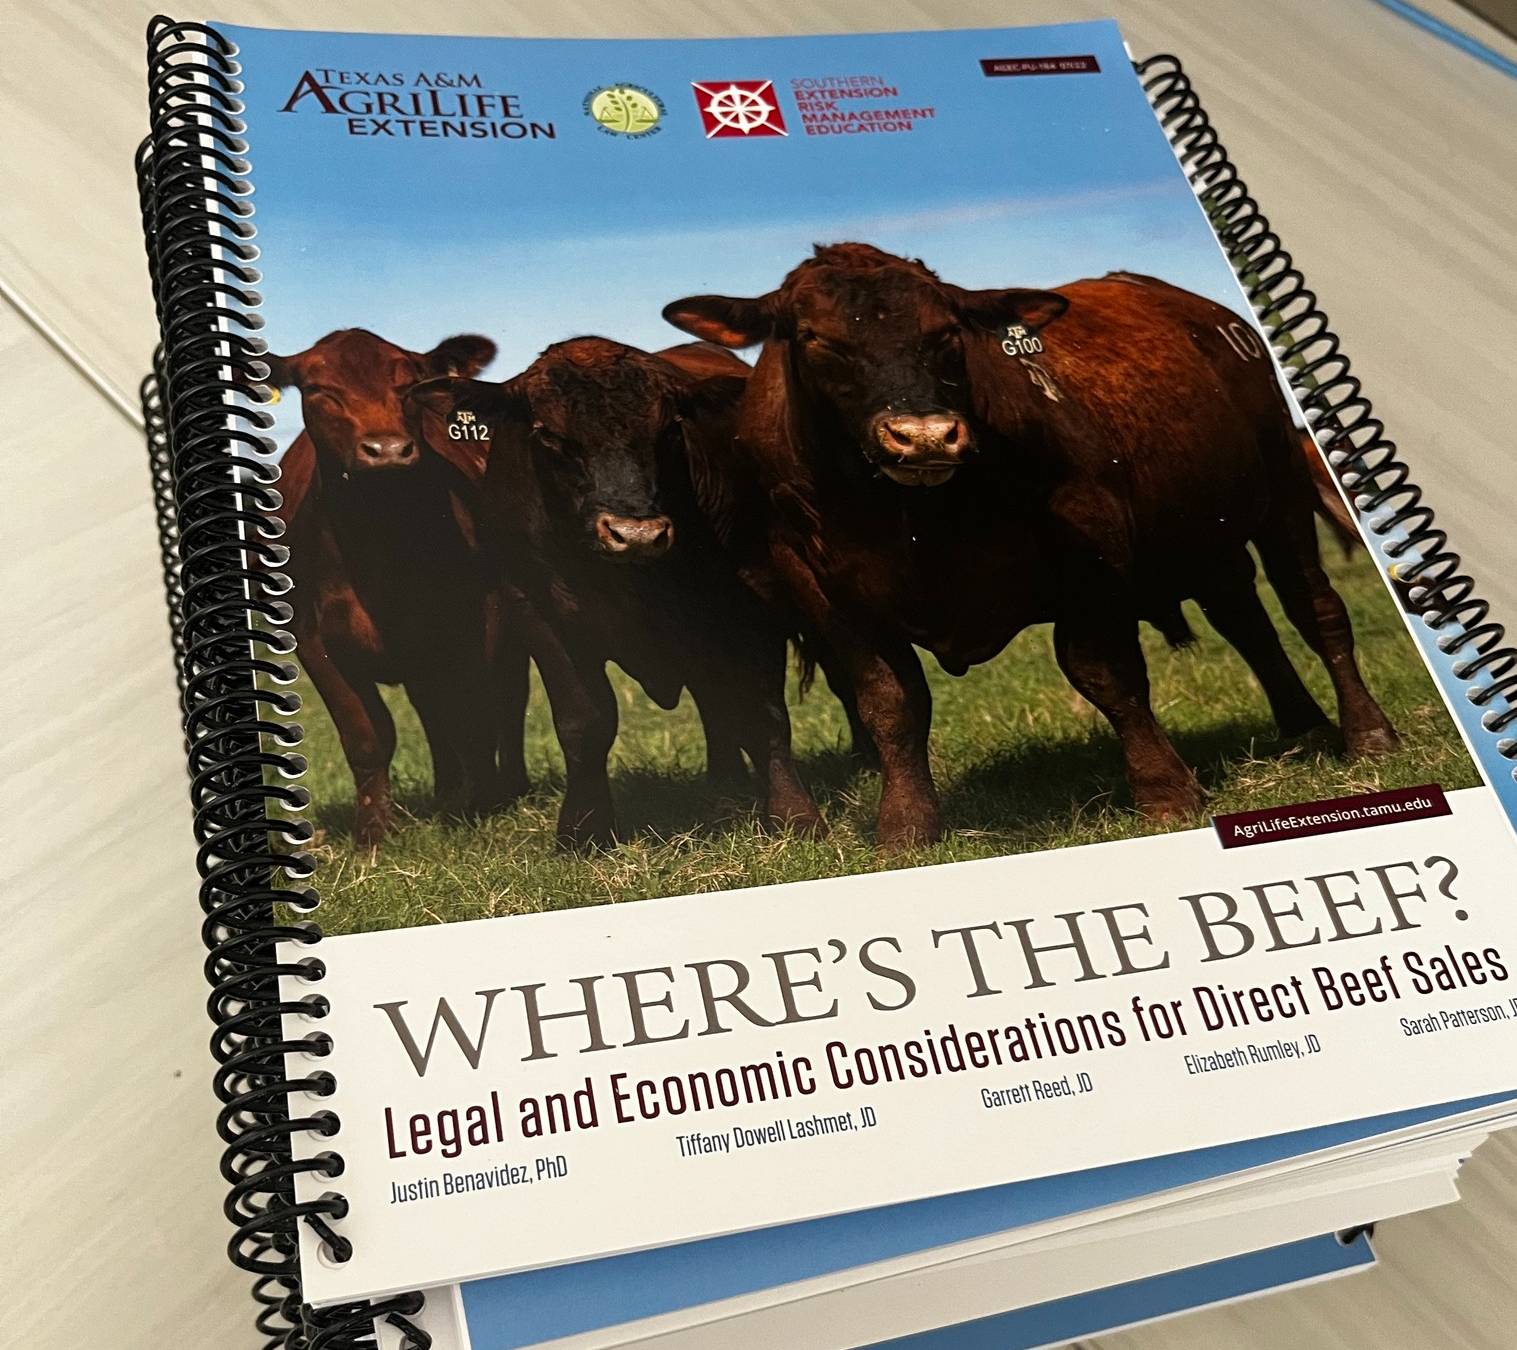 AgriLife Extension team wins two awards for ‘Where’s the Beef?’ project